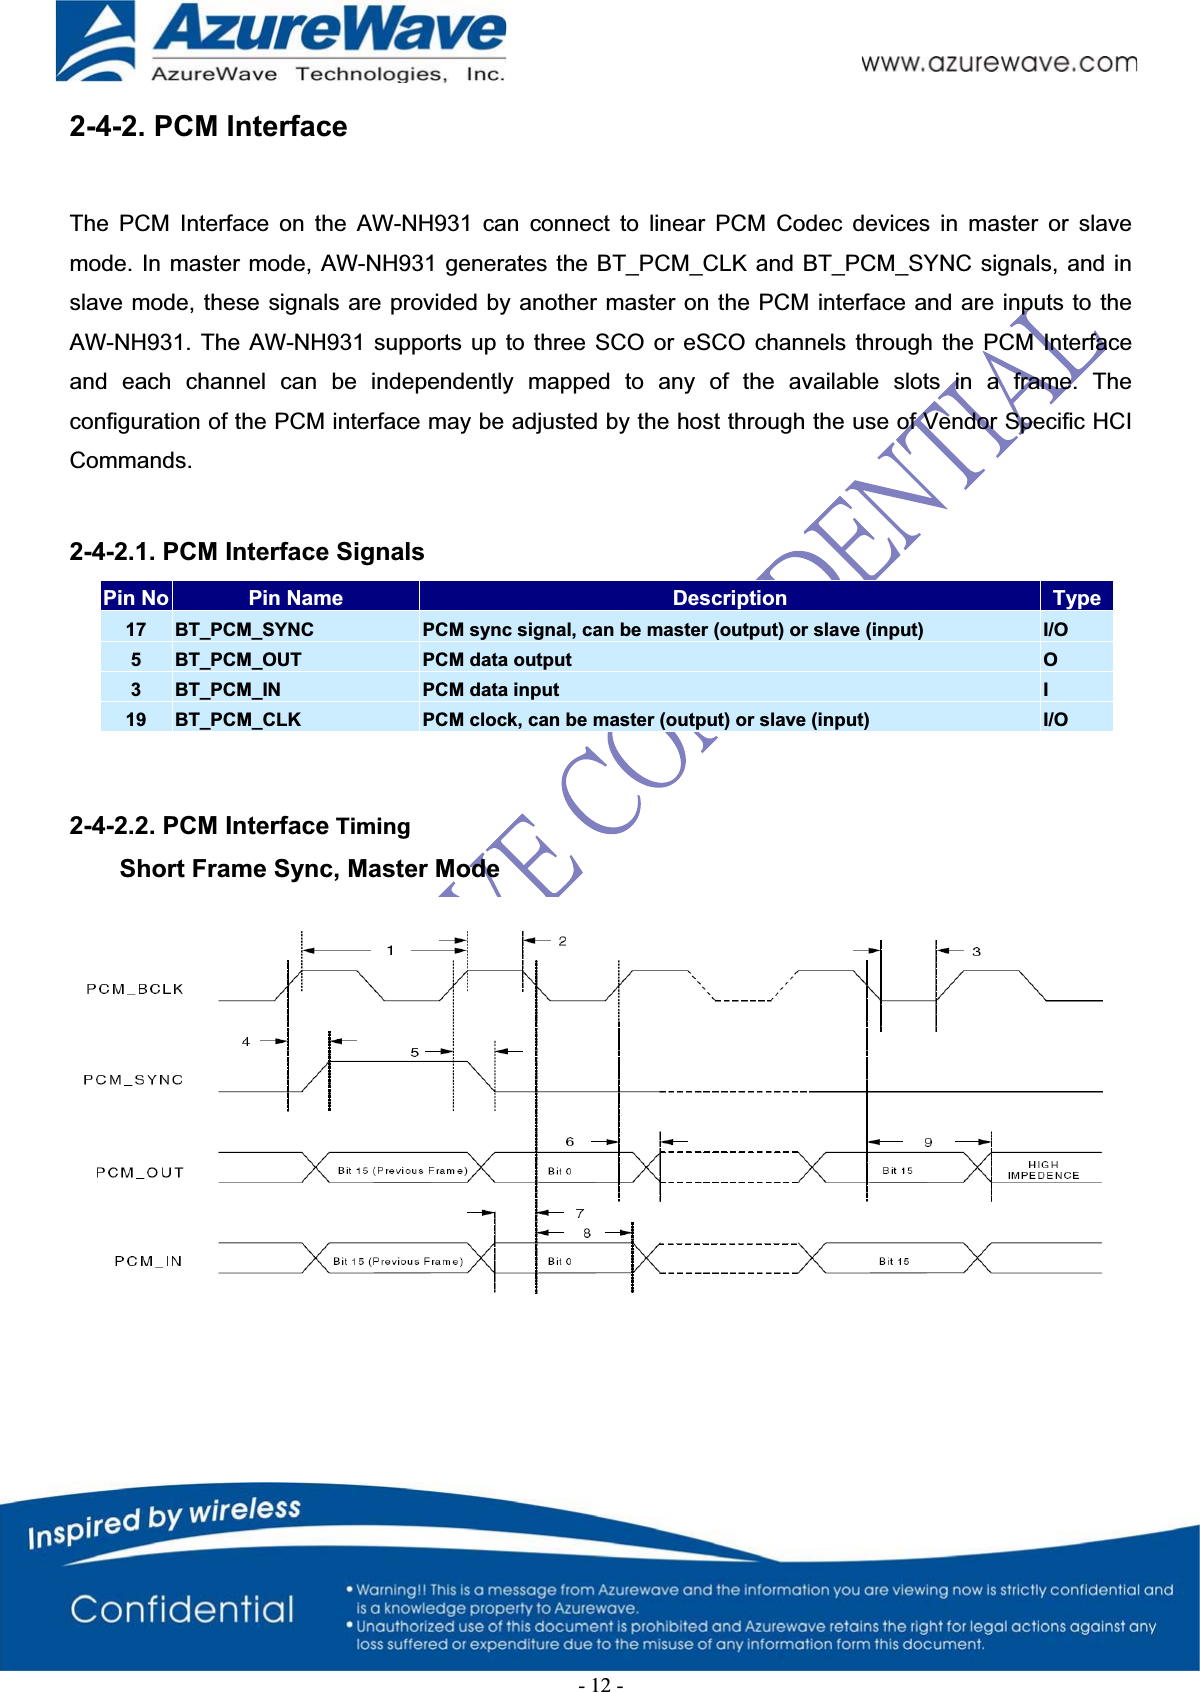 2-4-2. PCM Interface   The PCM Interface on the AW-NH931 can connect to linear PCM Codec devices in master or slave mode. In master mode, AW-NH931 generates the BT_PCM_CLK and BT_PCM_SYNC signals, and in slave mode, these signals are provided by another master on the PCM interface and are inputs to the AW-NH931. The AW-NH931 supports up to three SCO or eSCO channels through the PCM Interface and each channel can be independently mapped to any of the available slots in a frame. The configuration of the PCM interface may be adjusted by the host through the use of Vendor Specific HCI Commands.  2-4-2.1. PCM Interface Signals Pin No  Pin Name  Description  Type17  BT_PCM_SYNC  PCM sync signal, can be master (output) or slave (input)  I/O 5  BT_PCM_OUT  PCM data output  O 3  BT_PCM_IN  PCM data input  I 19  BT_PCM_CLK  PCM clock, can be master (output) or slave (input)  I/O 2-4-2.2. PCM Interface Timing Short Frame Sync, Master Mode  -12-